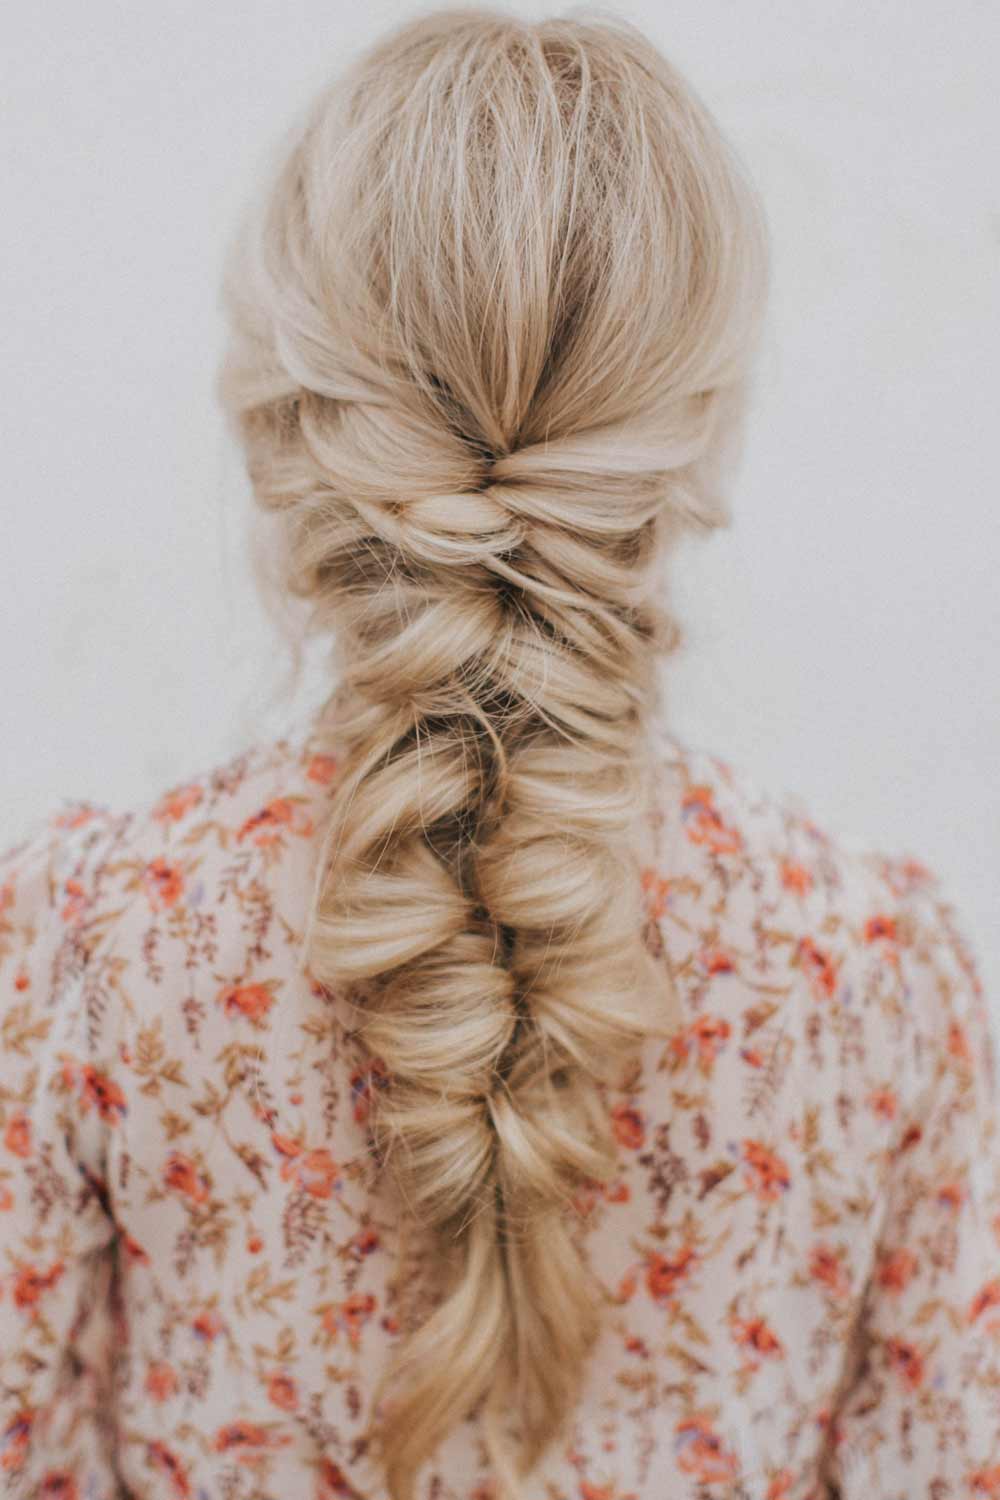 Popular Types Of Braids And Full Guide on Wearing Them - Glaminati